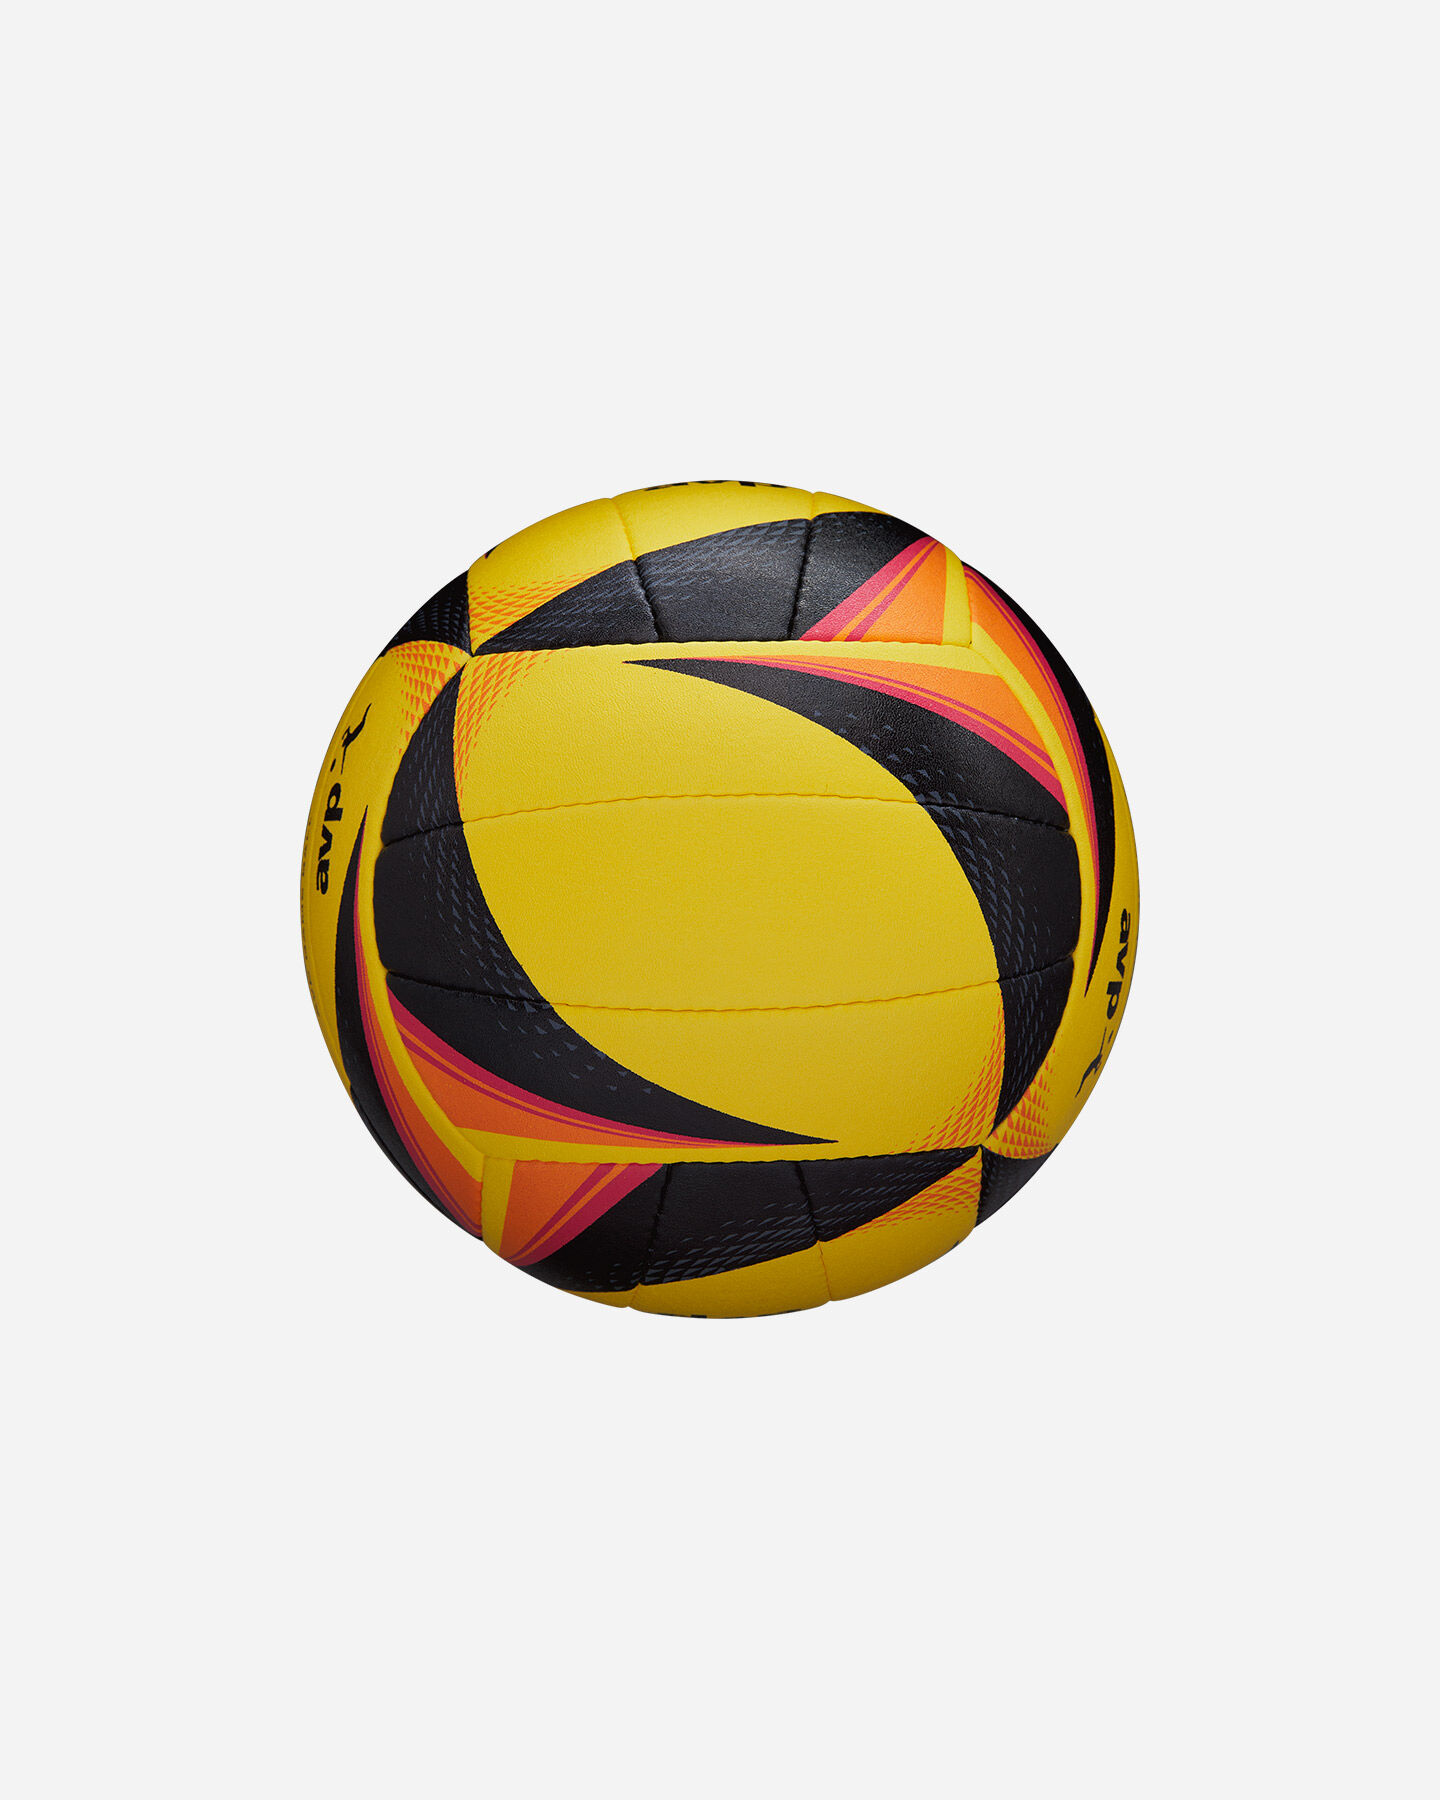  Pallone volley WILSON BEACH OPTX AVP OFFICIAL GB  S5440245|UNI|OFFICIAL scatto 4